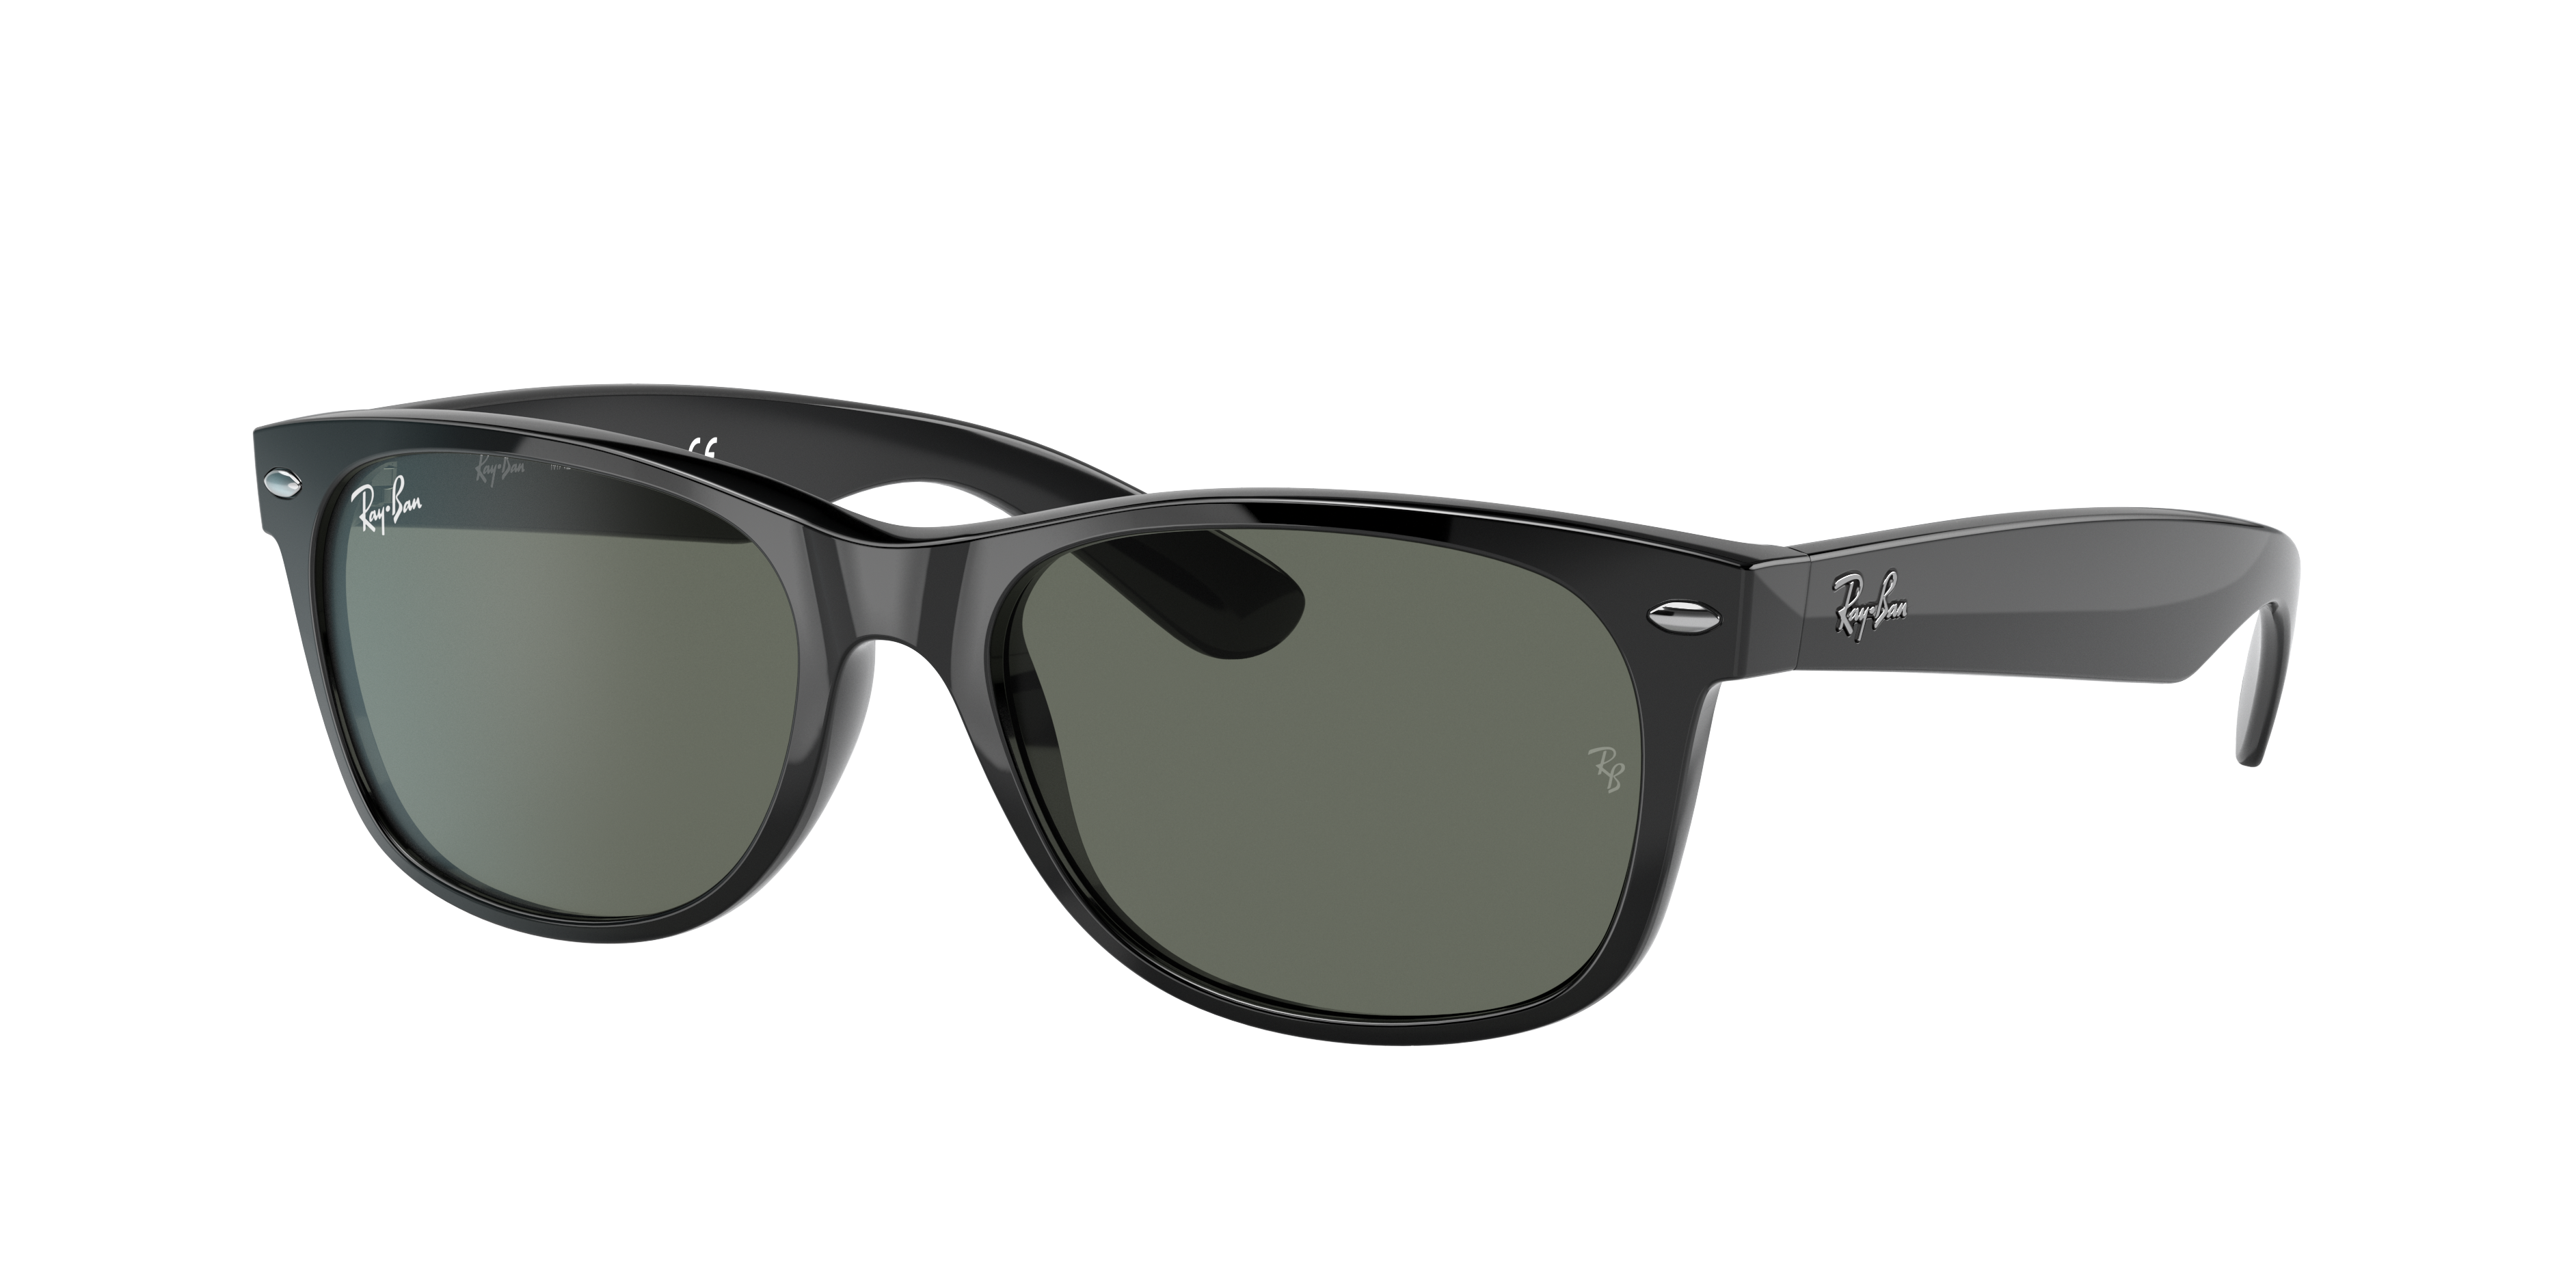 iconic ray ban sunglasses 7 little words